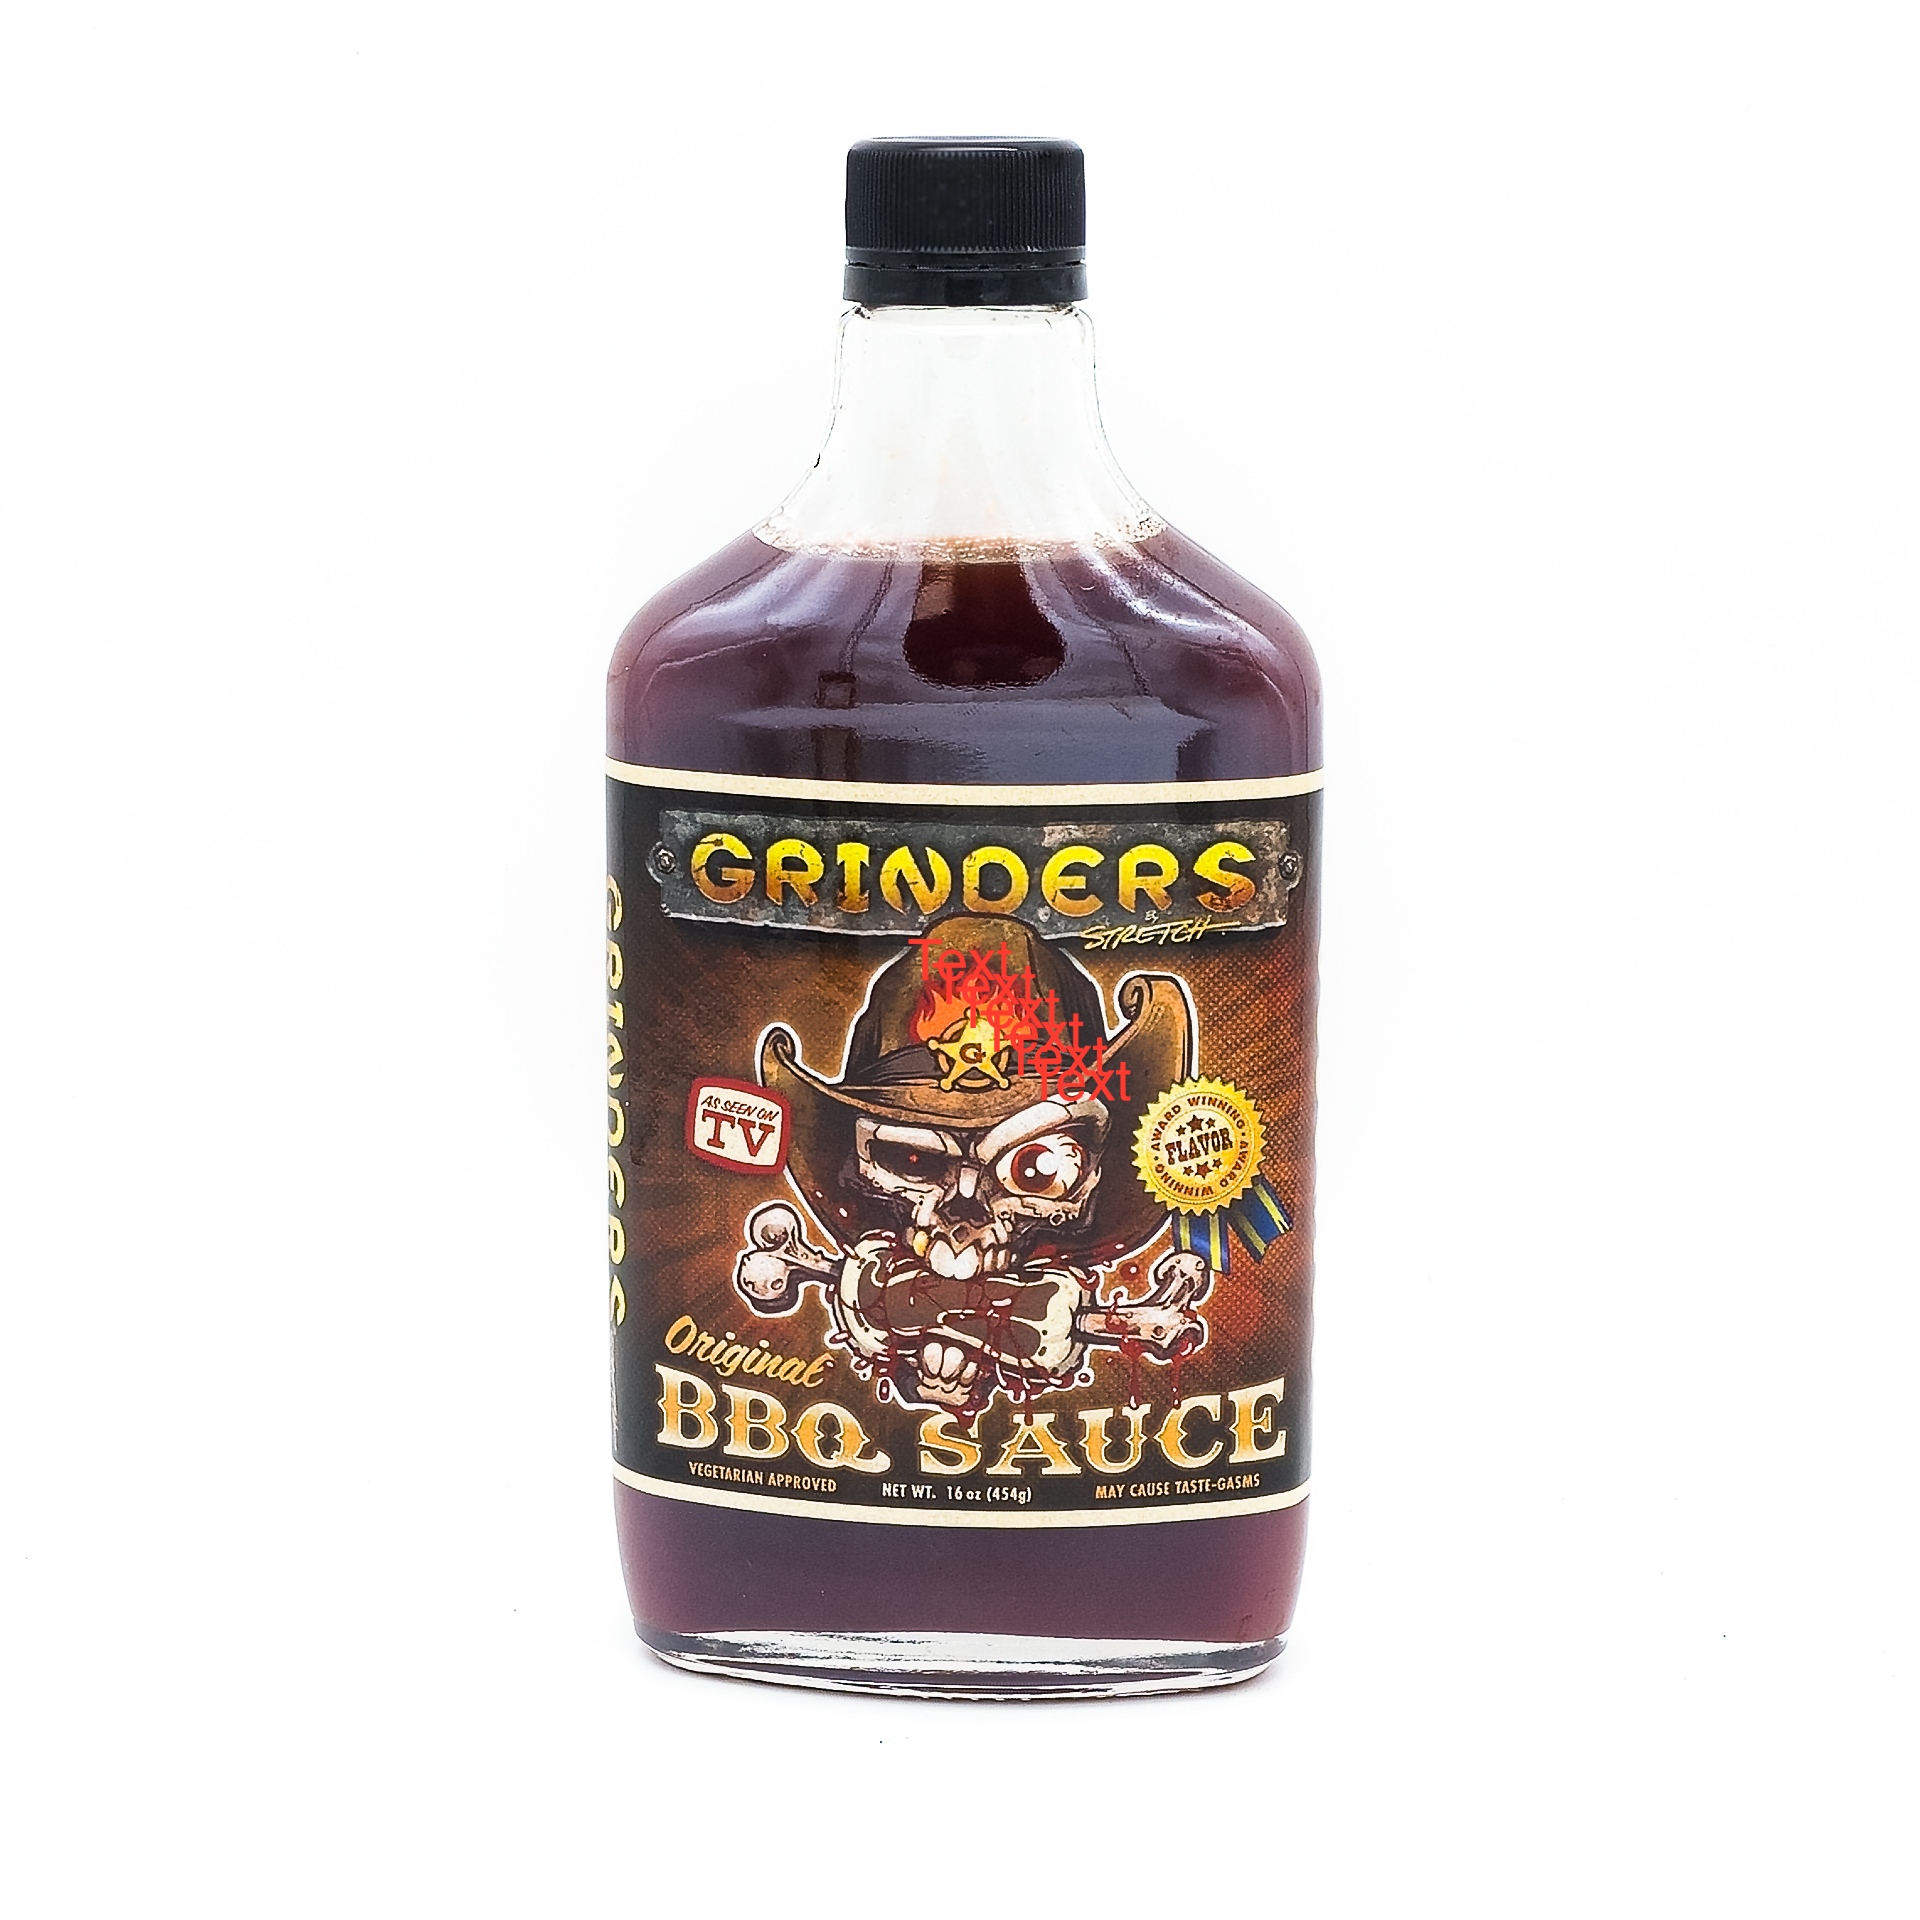 GRINDERS AWARD WINNING COMPETITION BBQ SAUCE “LET’S GIT GOOD & SAUCED”